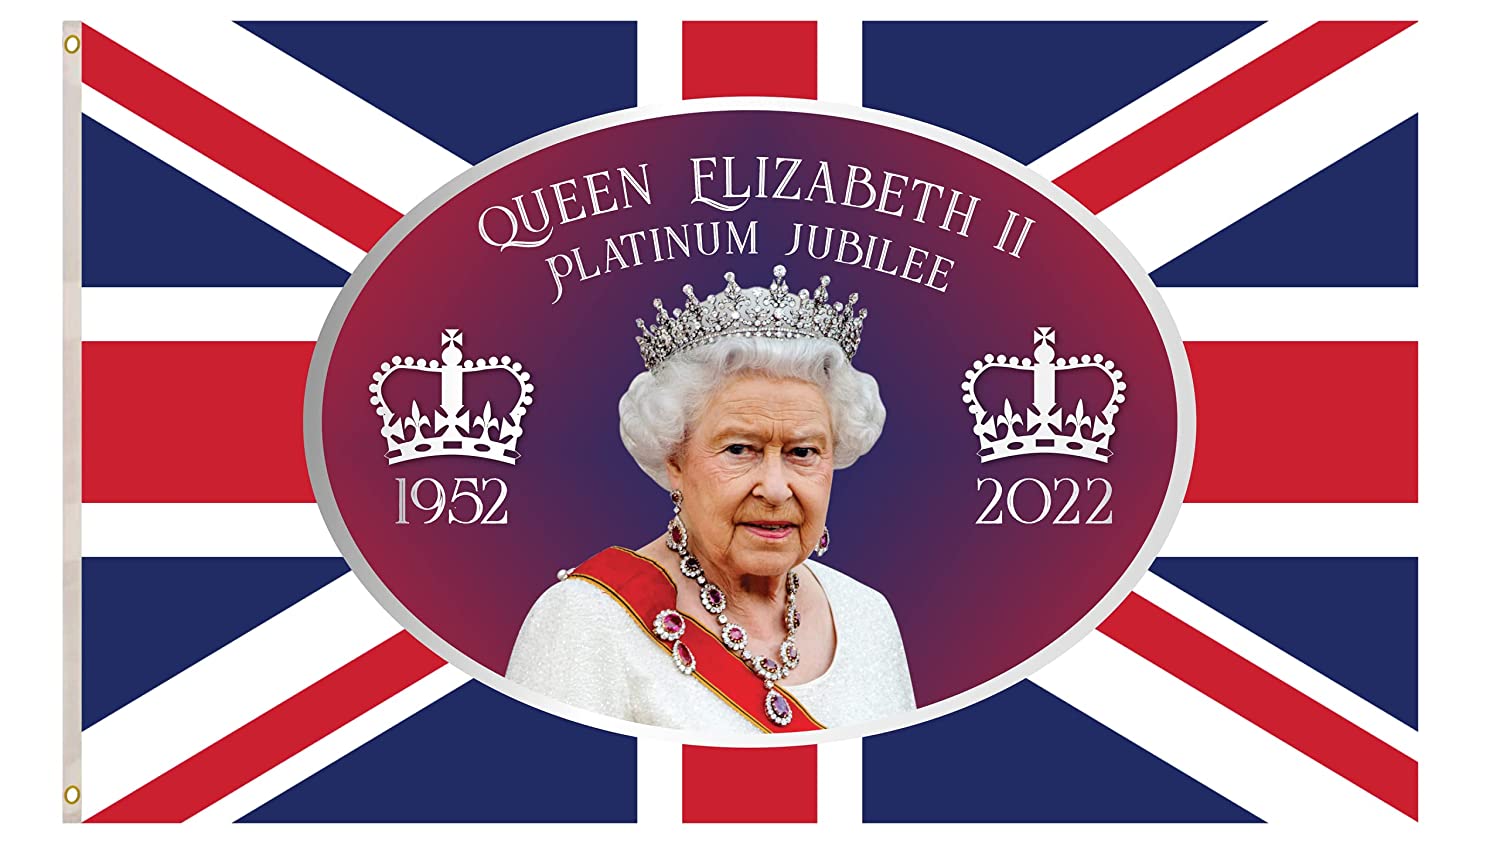 Happy jubilee day to all